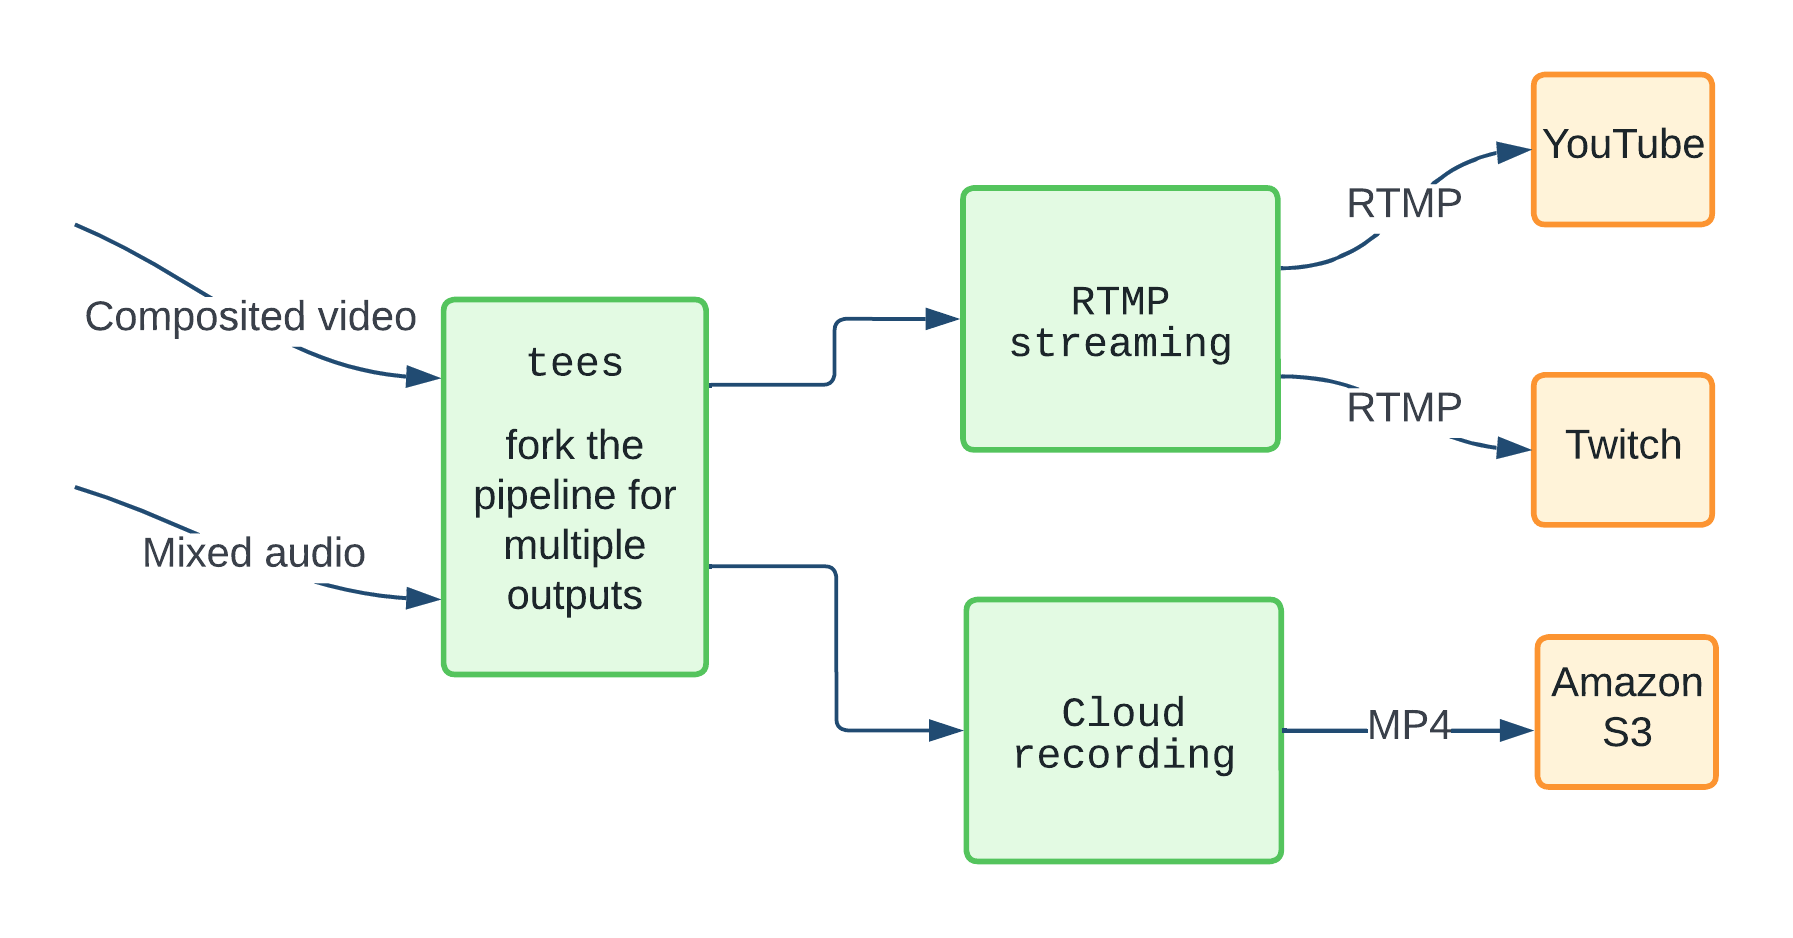 Modular outputs of the GStreamer pipeline